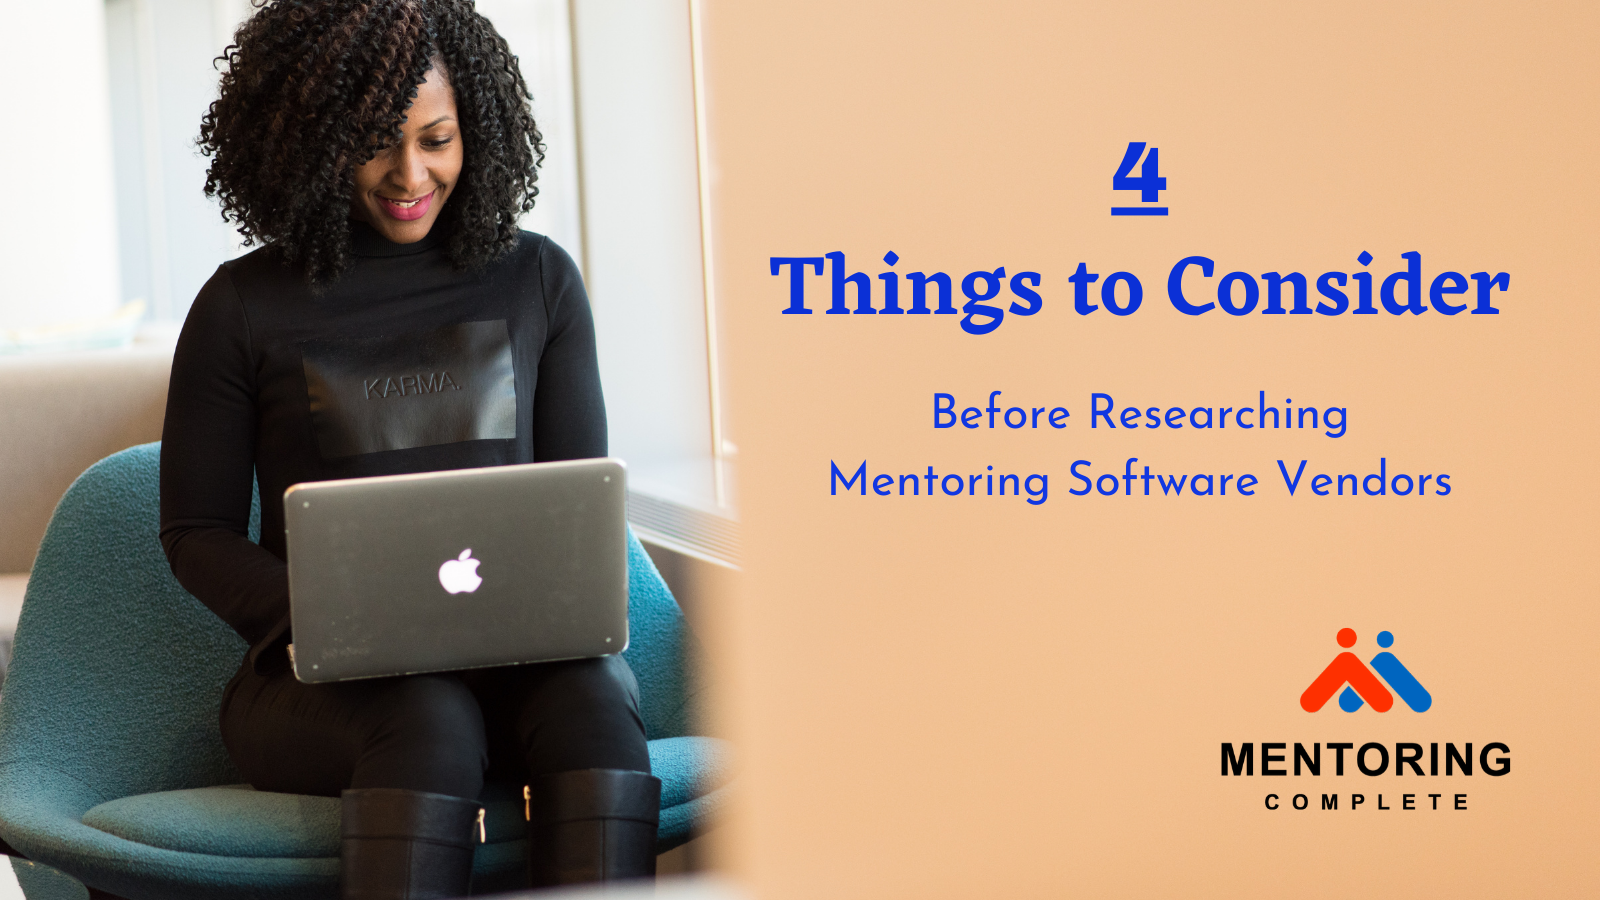 4 Things to Consider for mentoring software